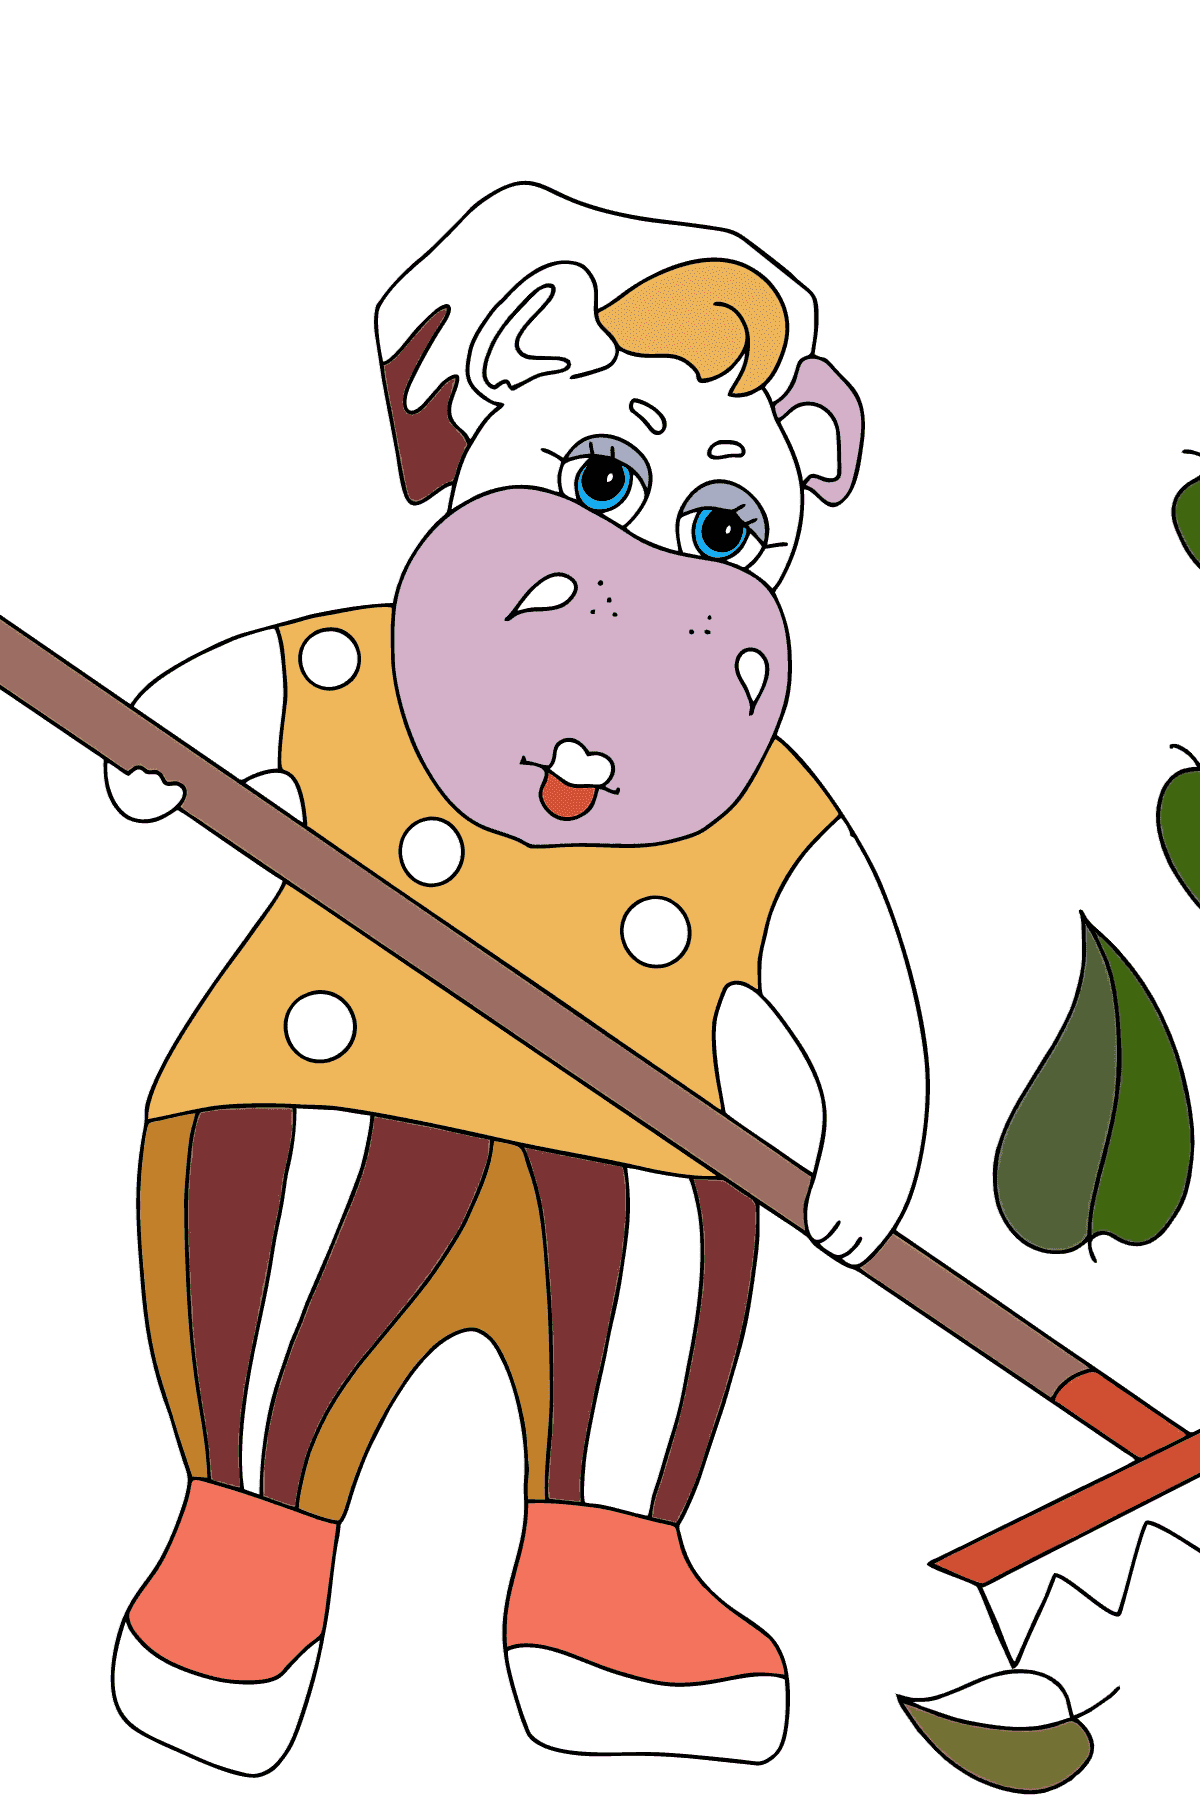 Cute Hippo (difficult) coloring page - Coloring Pages for Kids